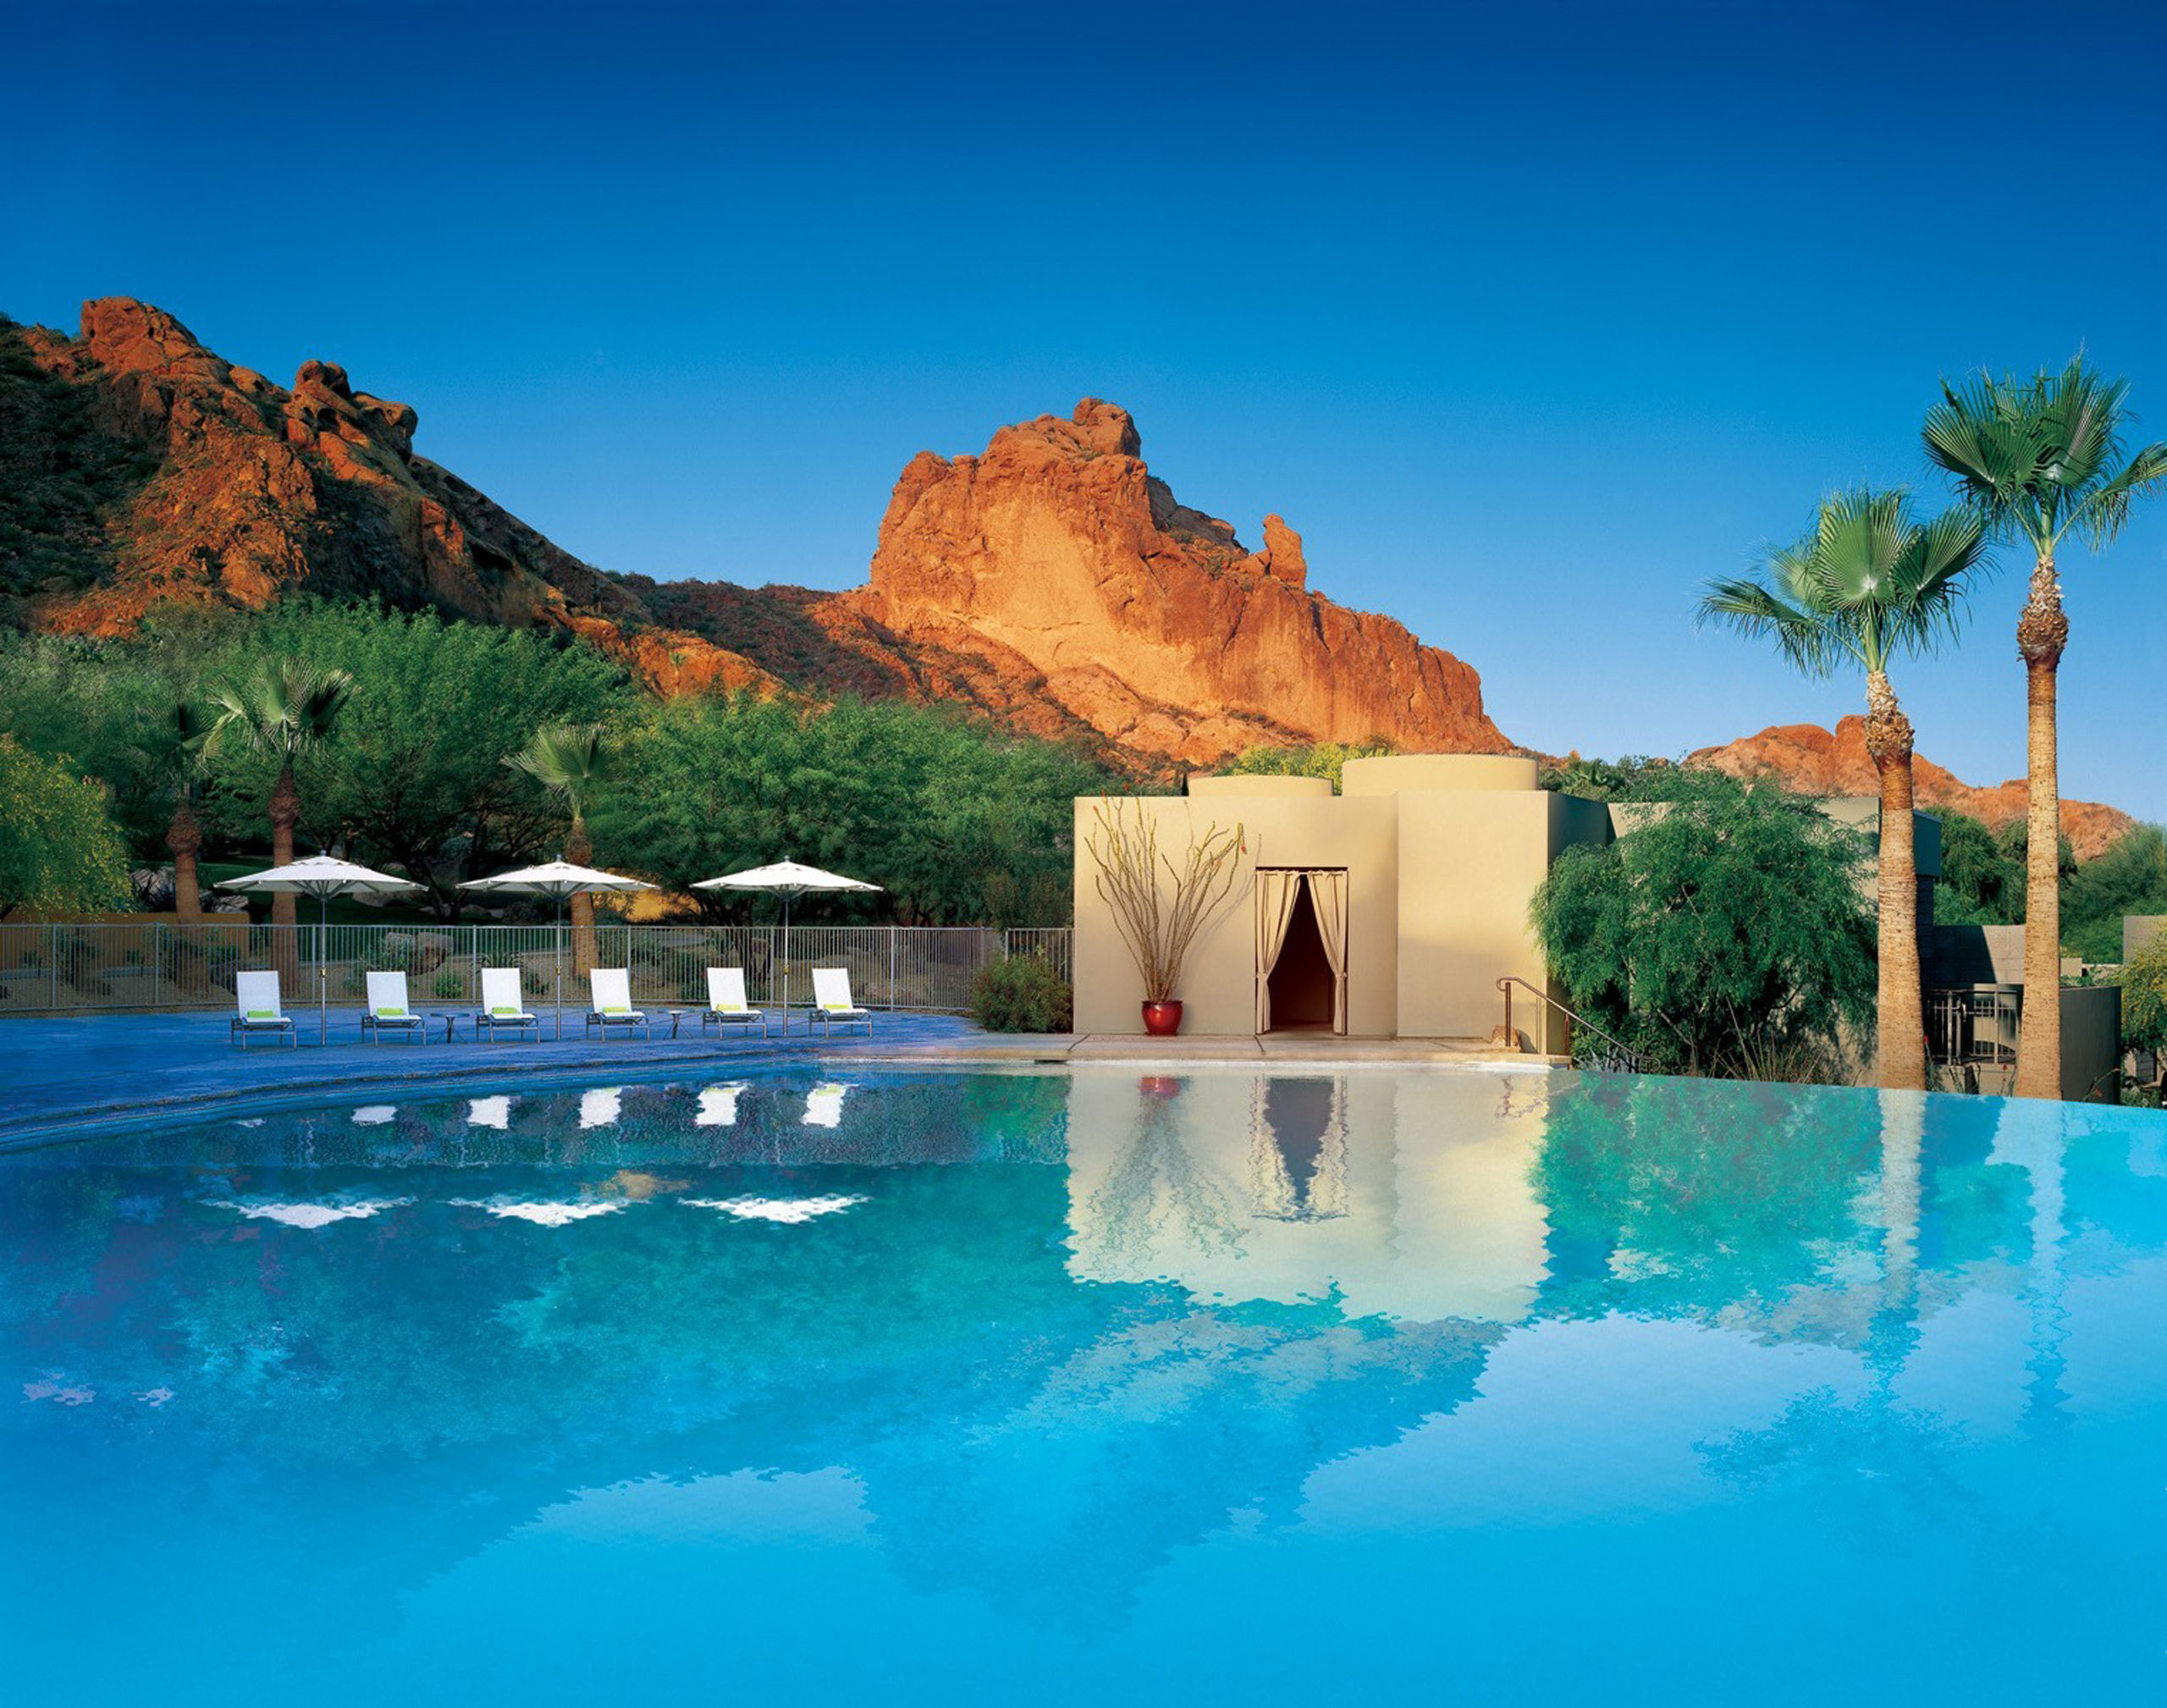 Gurney’s Resorts has also announced it has acquired Sanctuary Camelback Mountain in early November. The resort and spa is located in Paradise Valley, Arizona.       Photo courtesy of Sanctuary Camelback Mountain, A Gurney’s Resort  & Spa